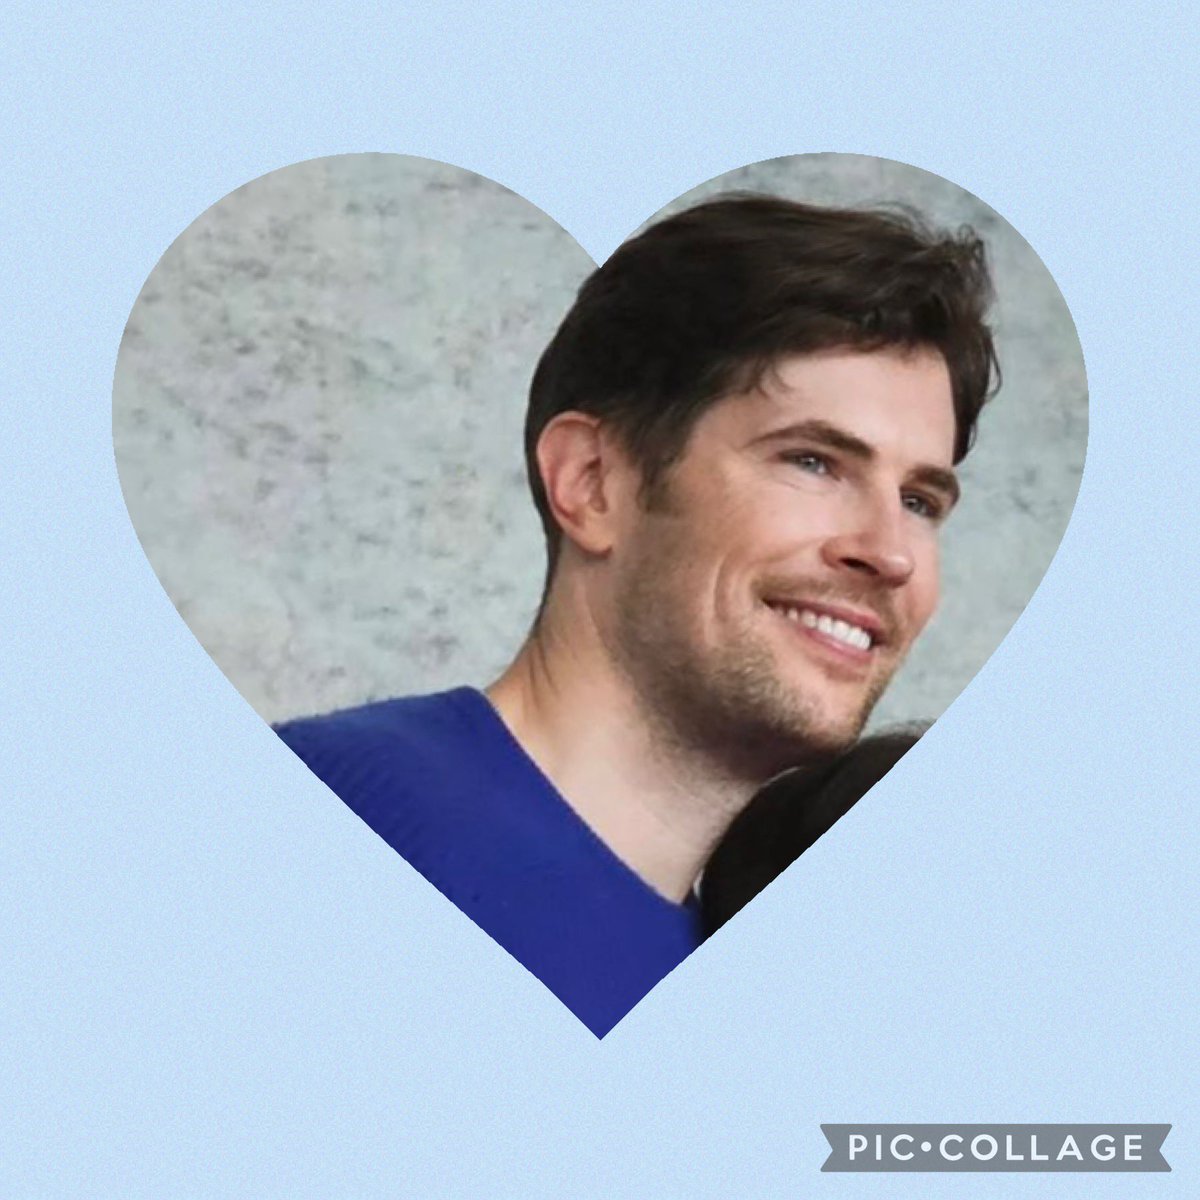 🌻🇫🇷❤️Happy Wonderful Weekend Berryites love ❤️ from Australia 🇦🇺 🌻🐶🌷🐱💐🐨🌴🦋🍄🐬🦜🌻 Wishing you all a Berry Sweet Day ❤️🌷🩷 #lordjohngrey #outlander #landconparis